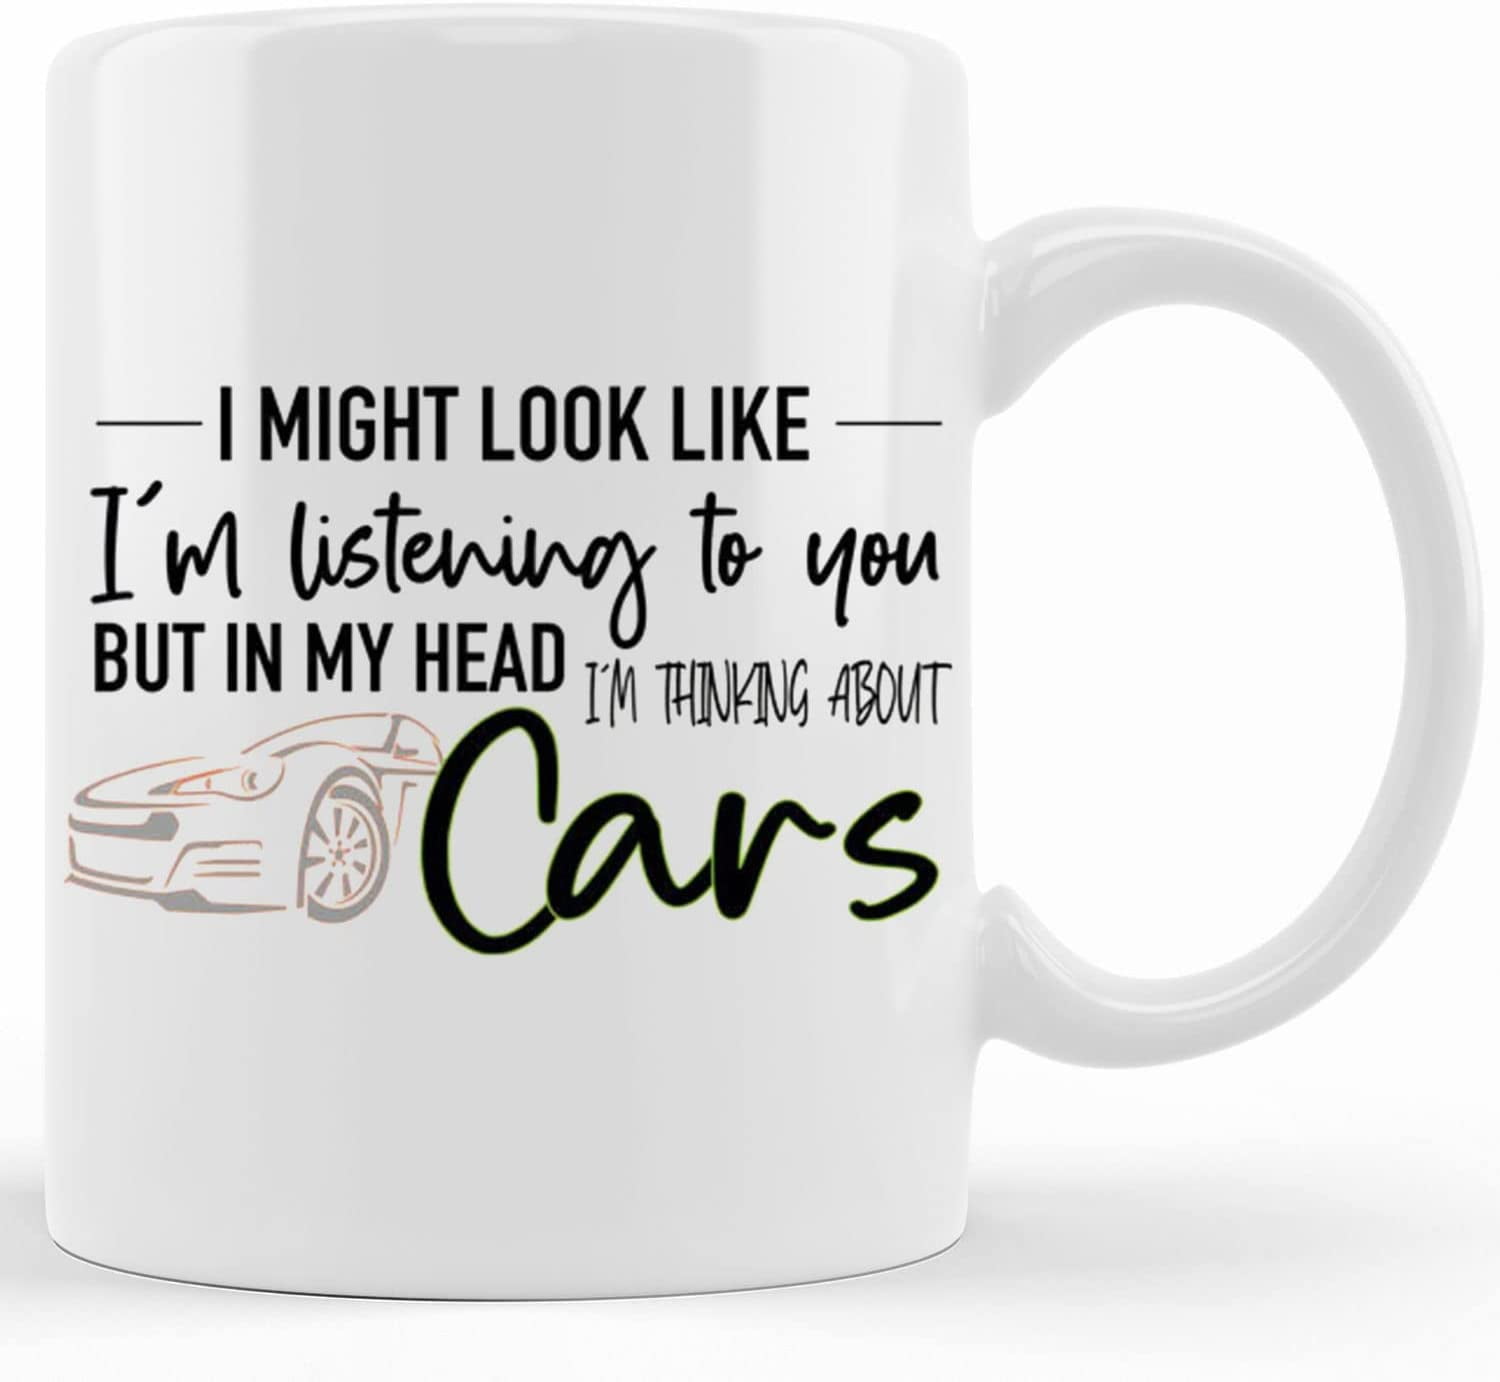 Car Mug, Gift For Car Lover, Thinking About Cars, Car Coffee Mug, Gift For  Him, Car Lover Gift, Funny Mugs, Dad Mug, Father's Day Gift, RED